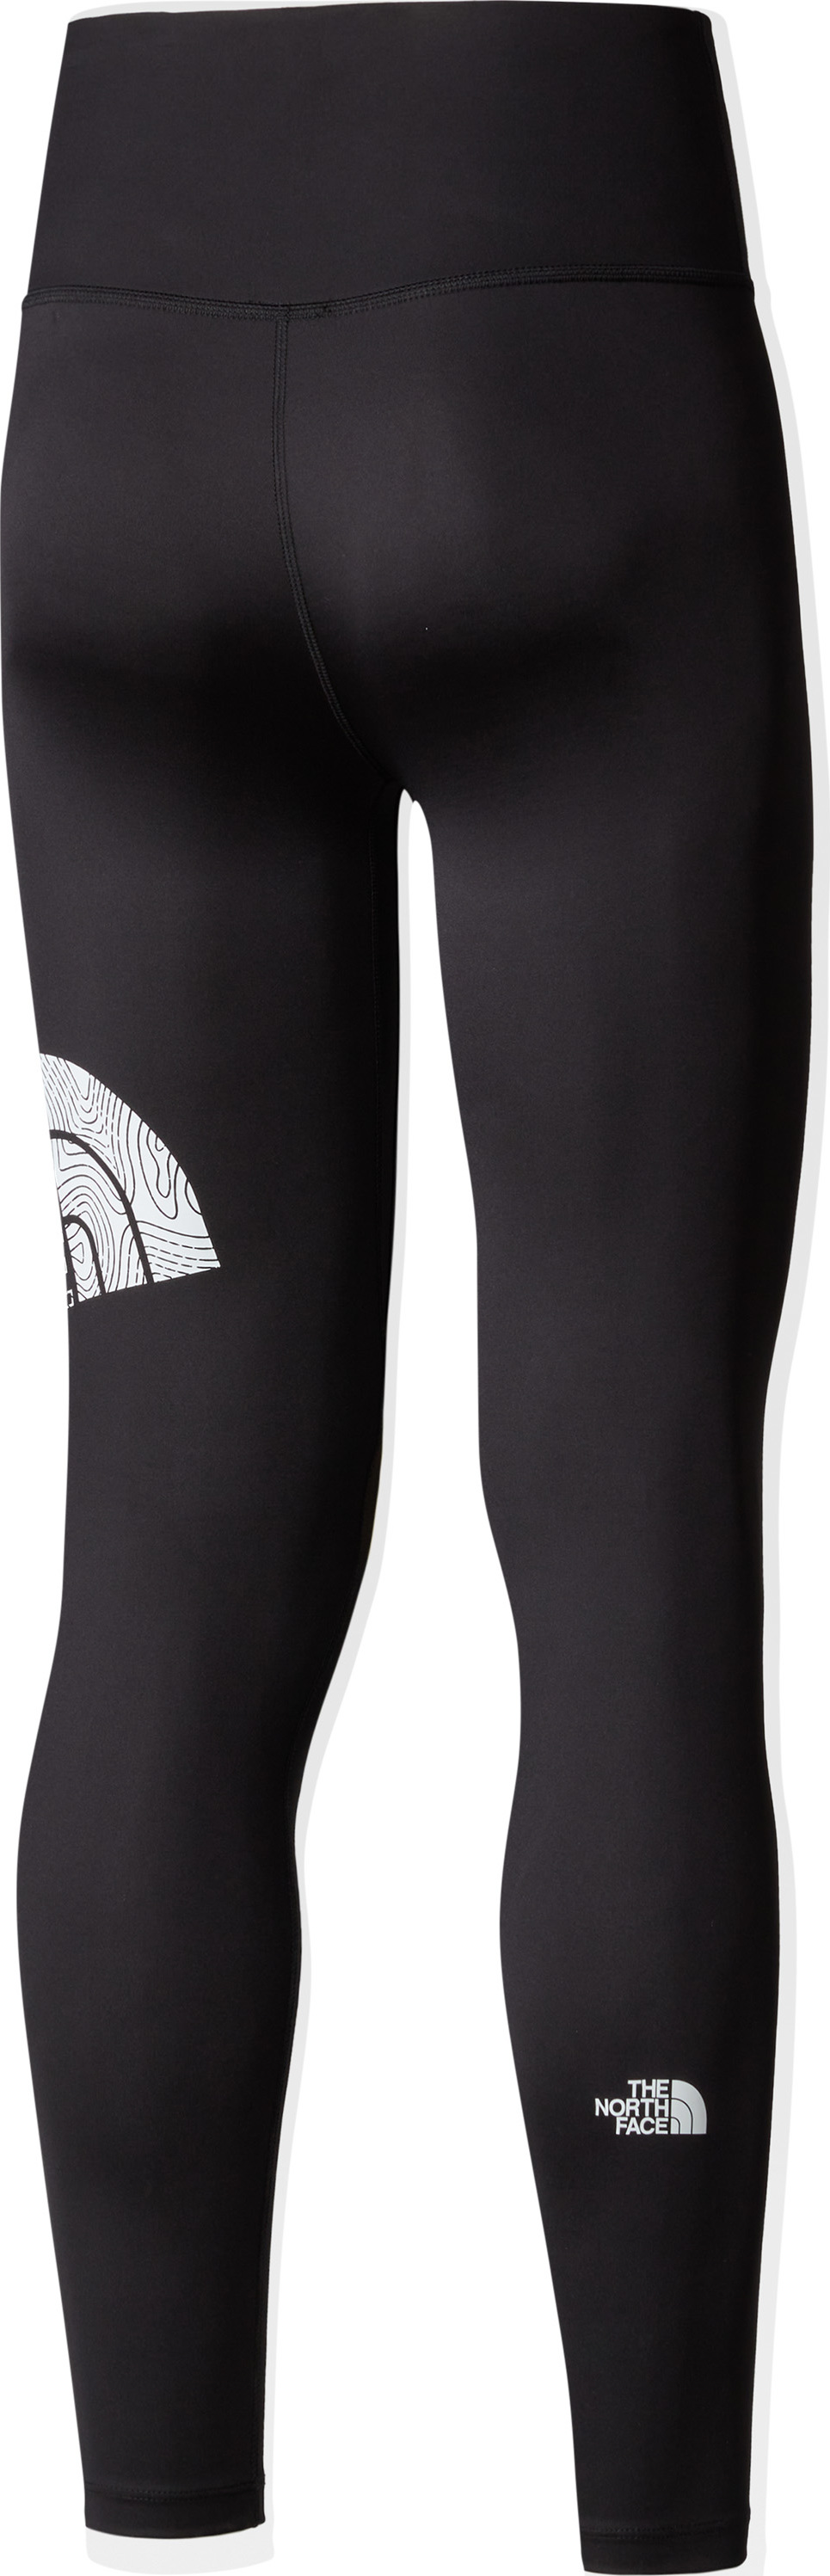 The North Face Women's Flex High Rise 7/8 Trace Tights TNF Black, Buy The  North Face Women's Flex High Rise 7/8 Trace Tights TNF Black here